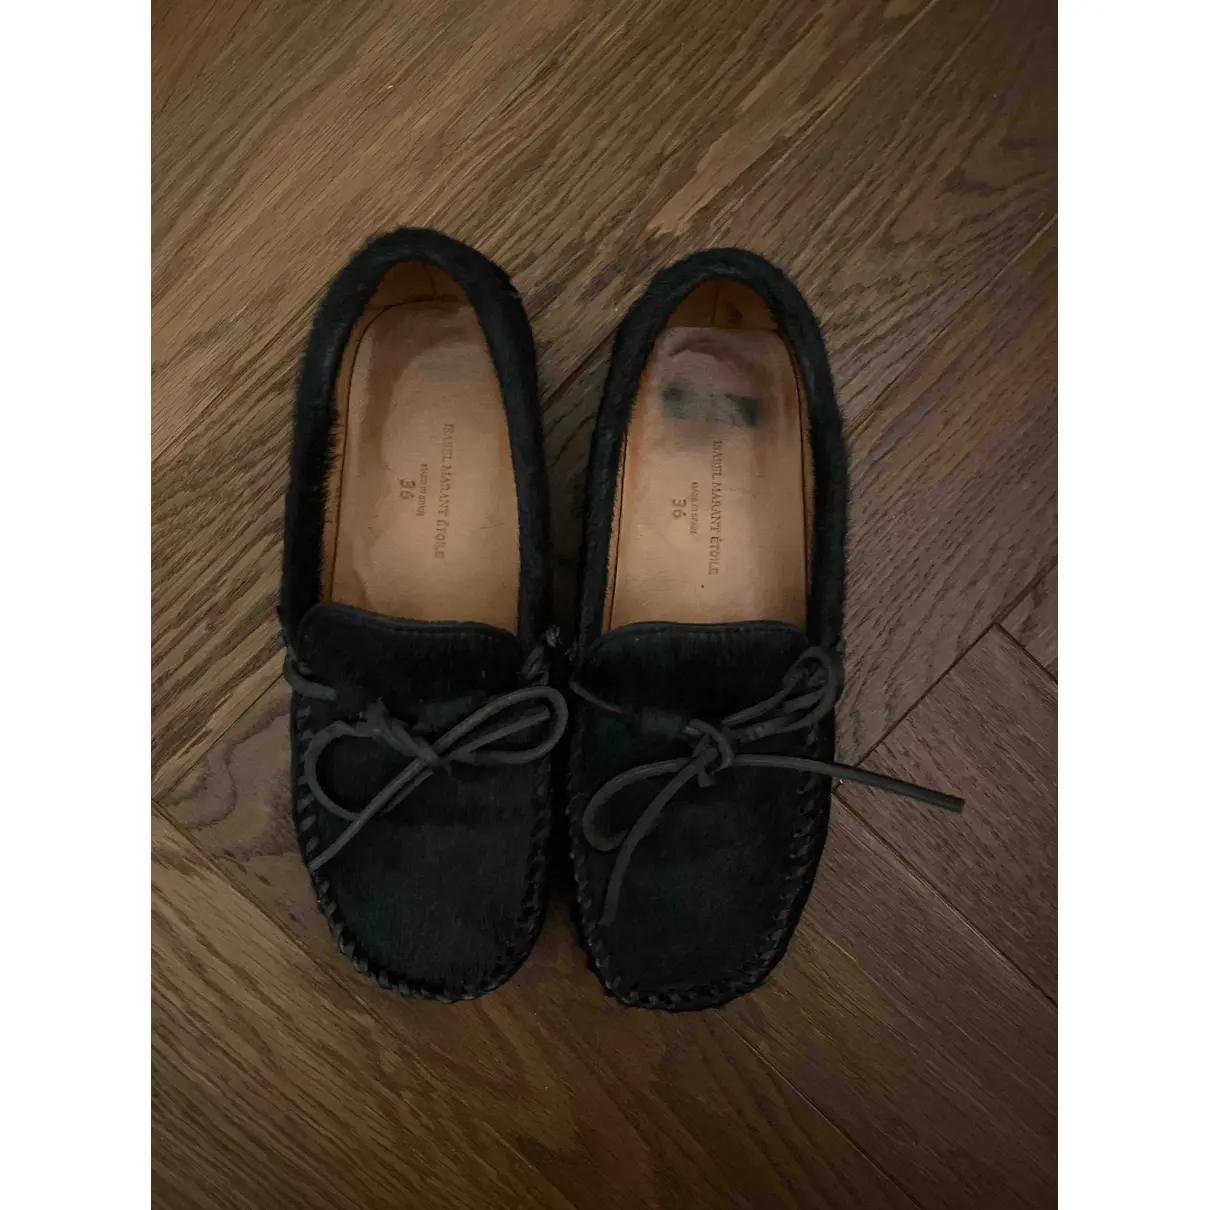 Isabel Marant Pony-style calfskin flats for sale